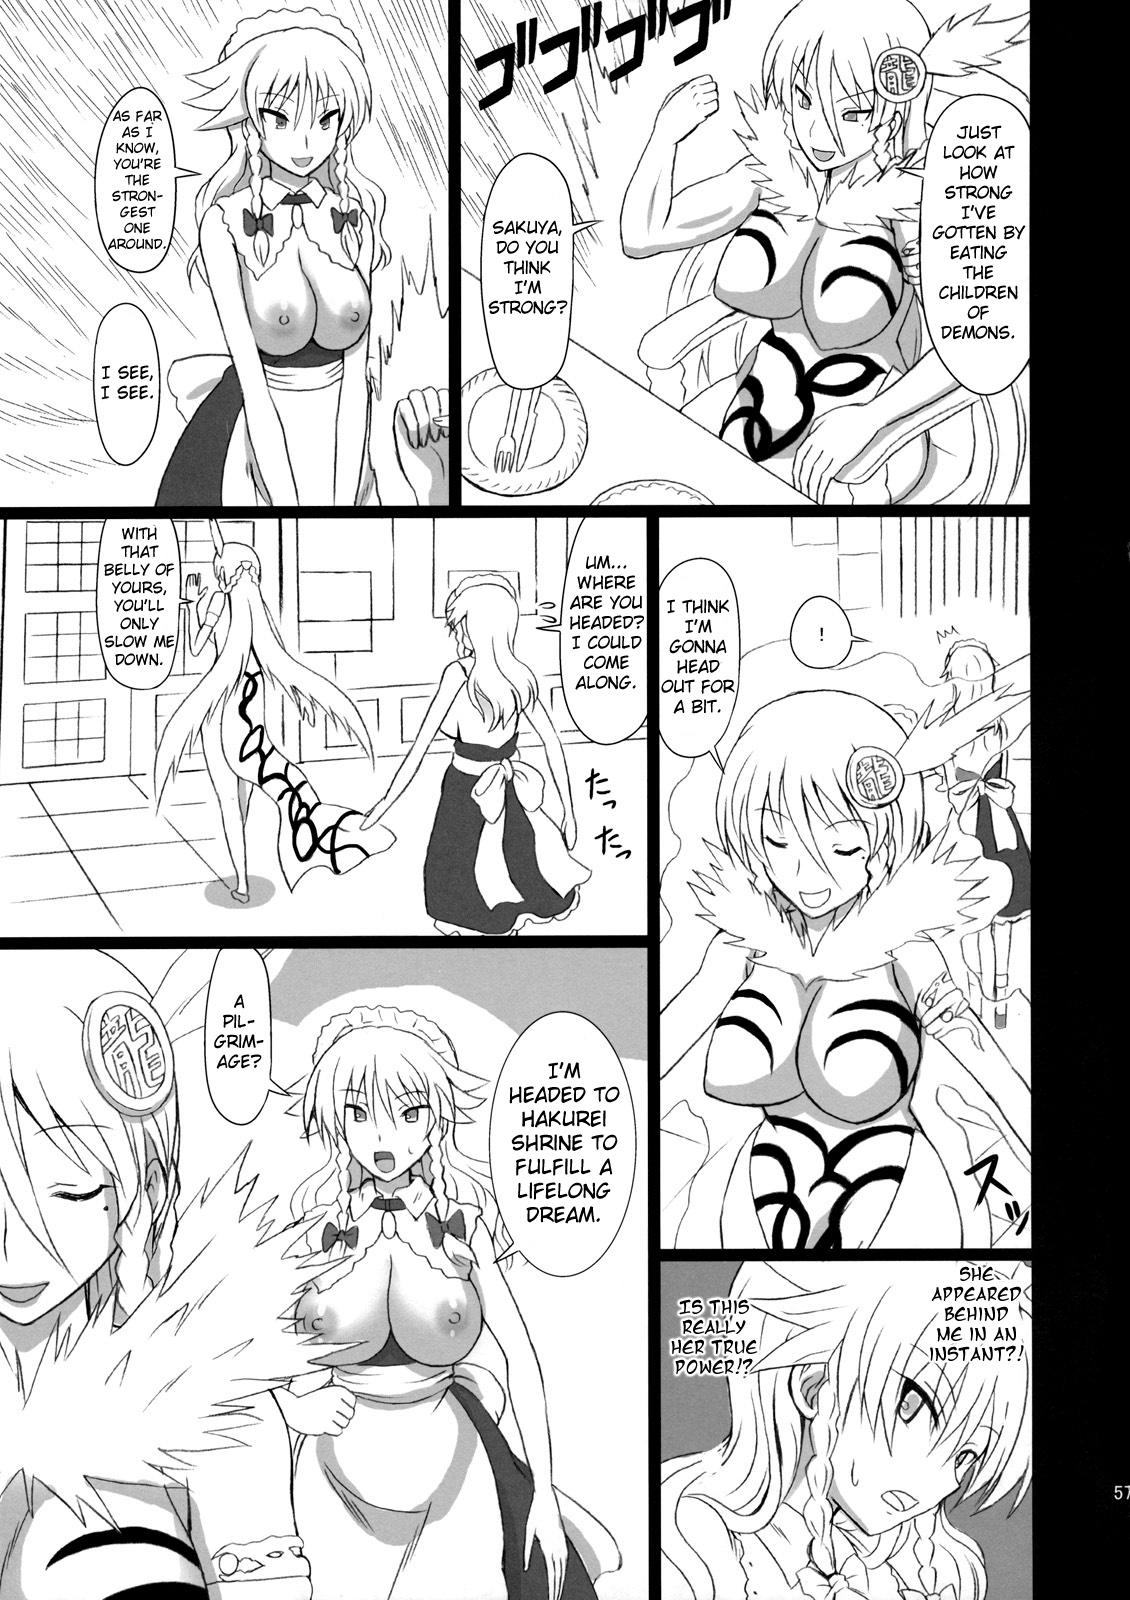 Mmf Extend Party 3 - Touhou project Vibrator - Page 57